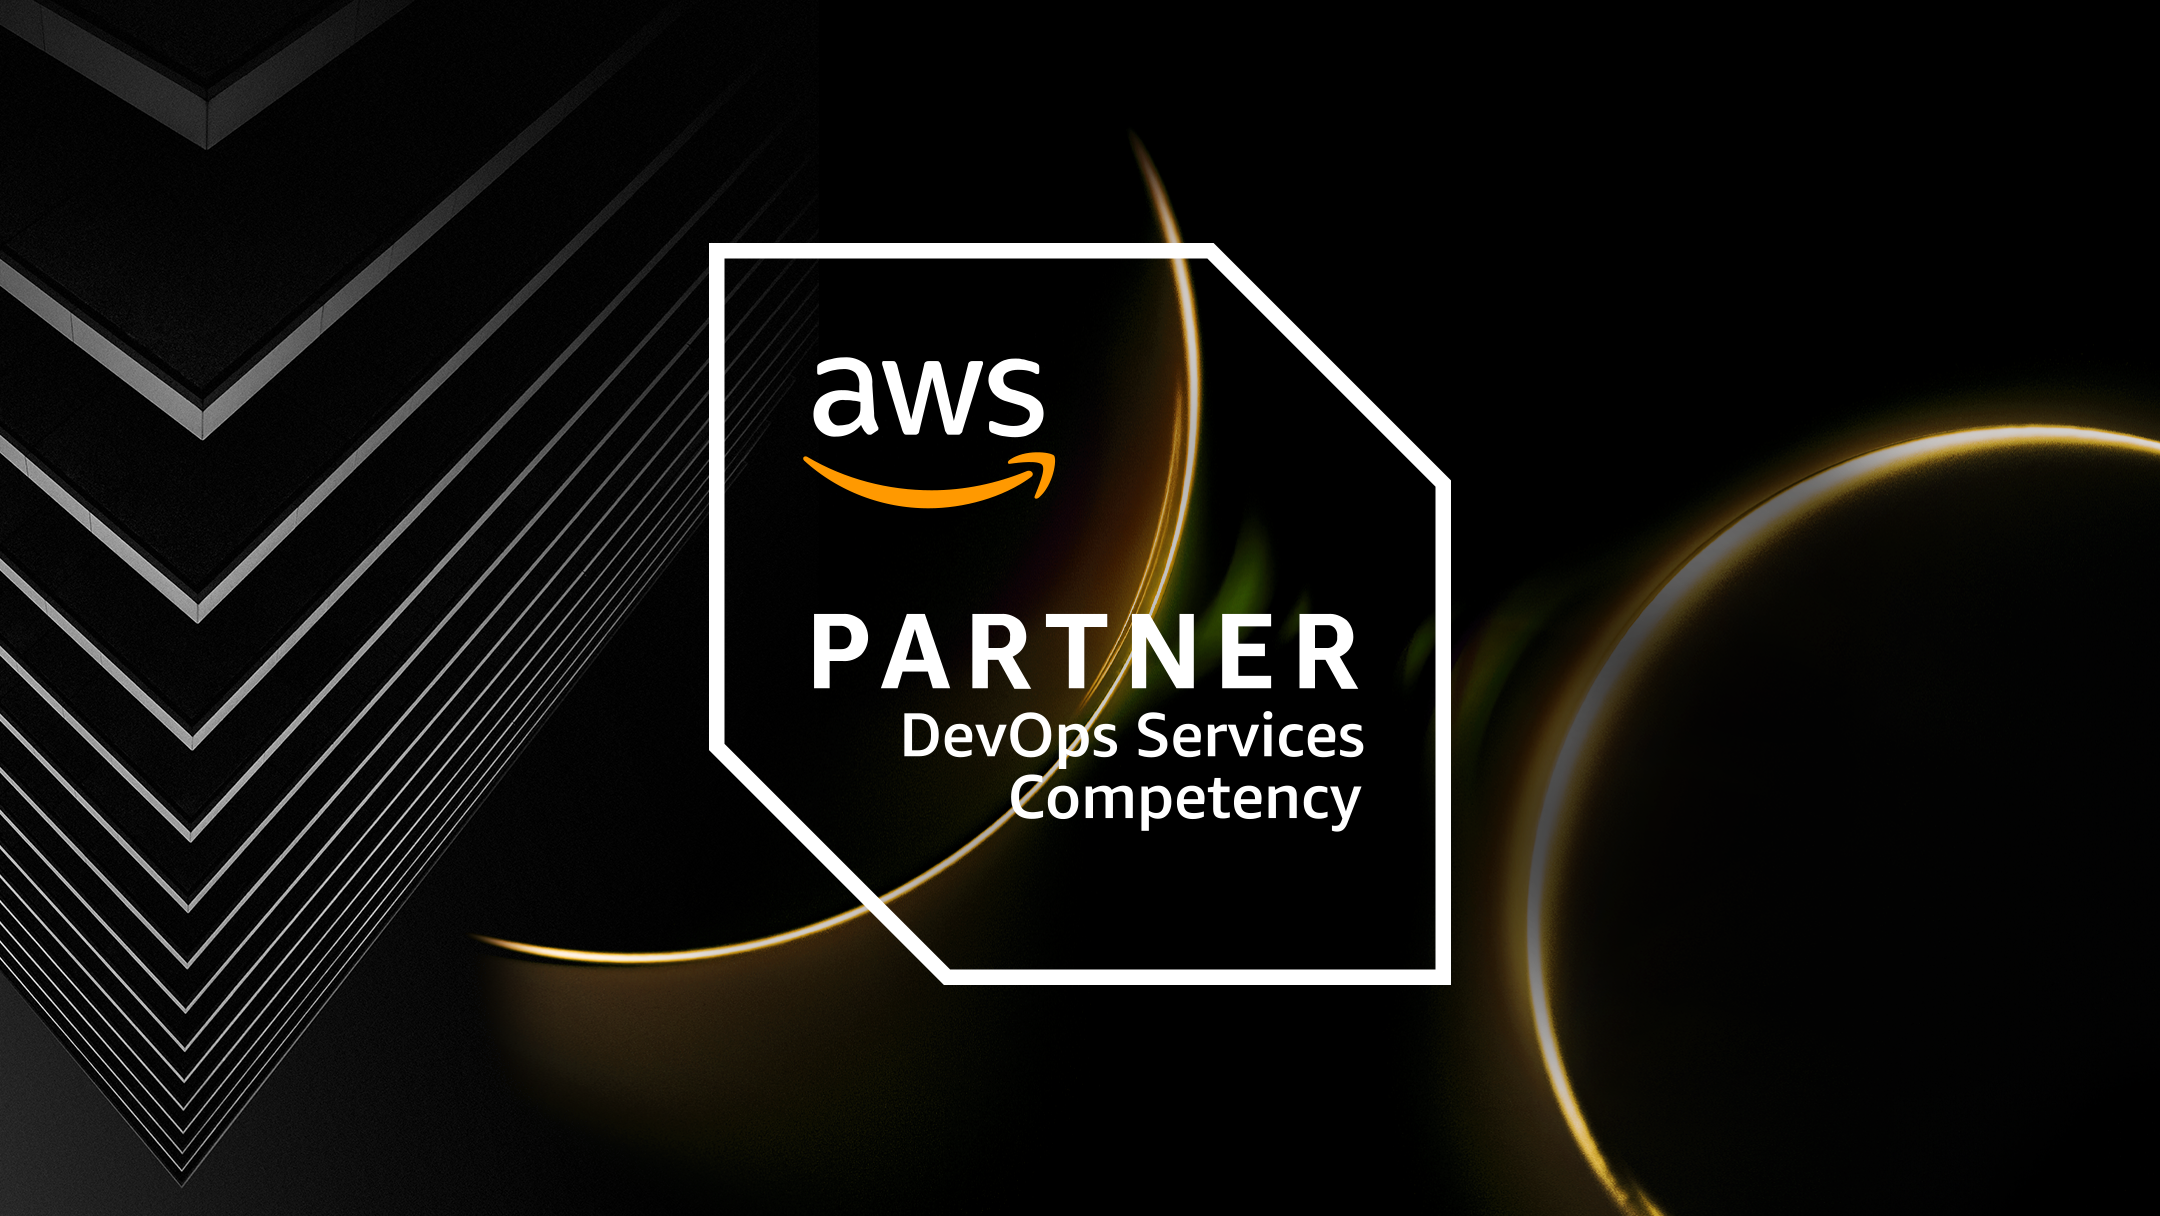 BBD achieves AWS DevOps Services Competency status